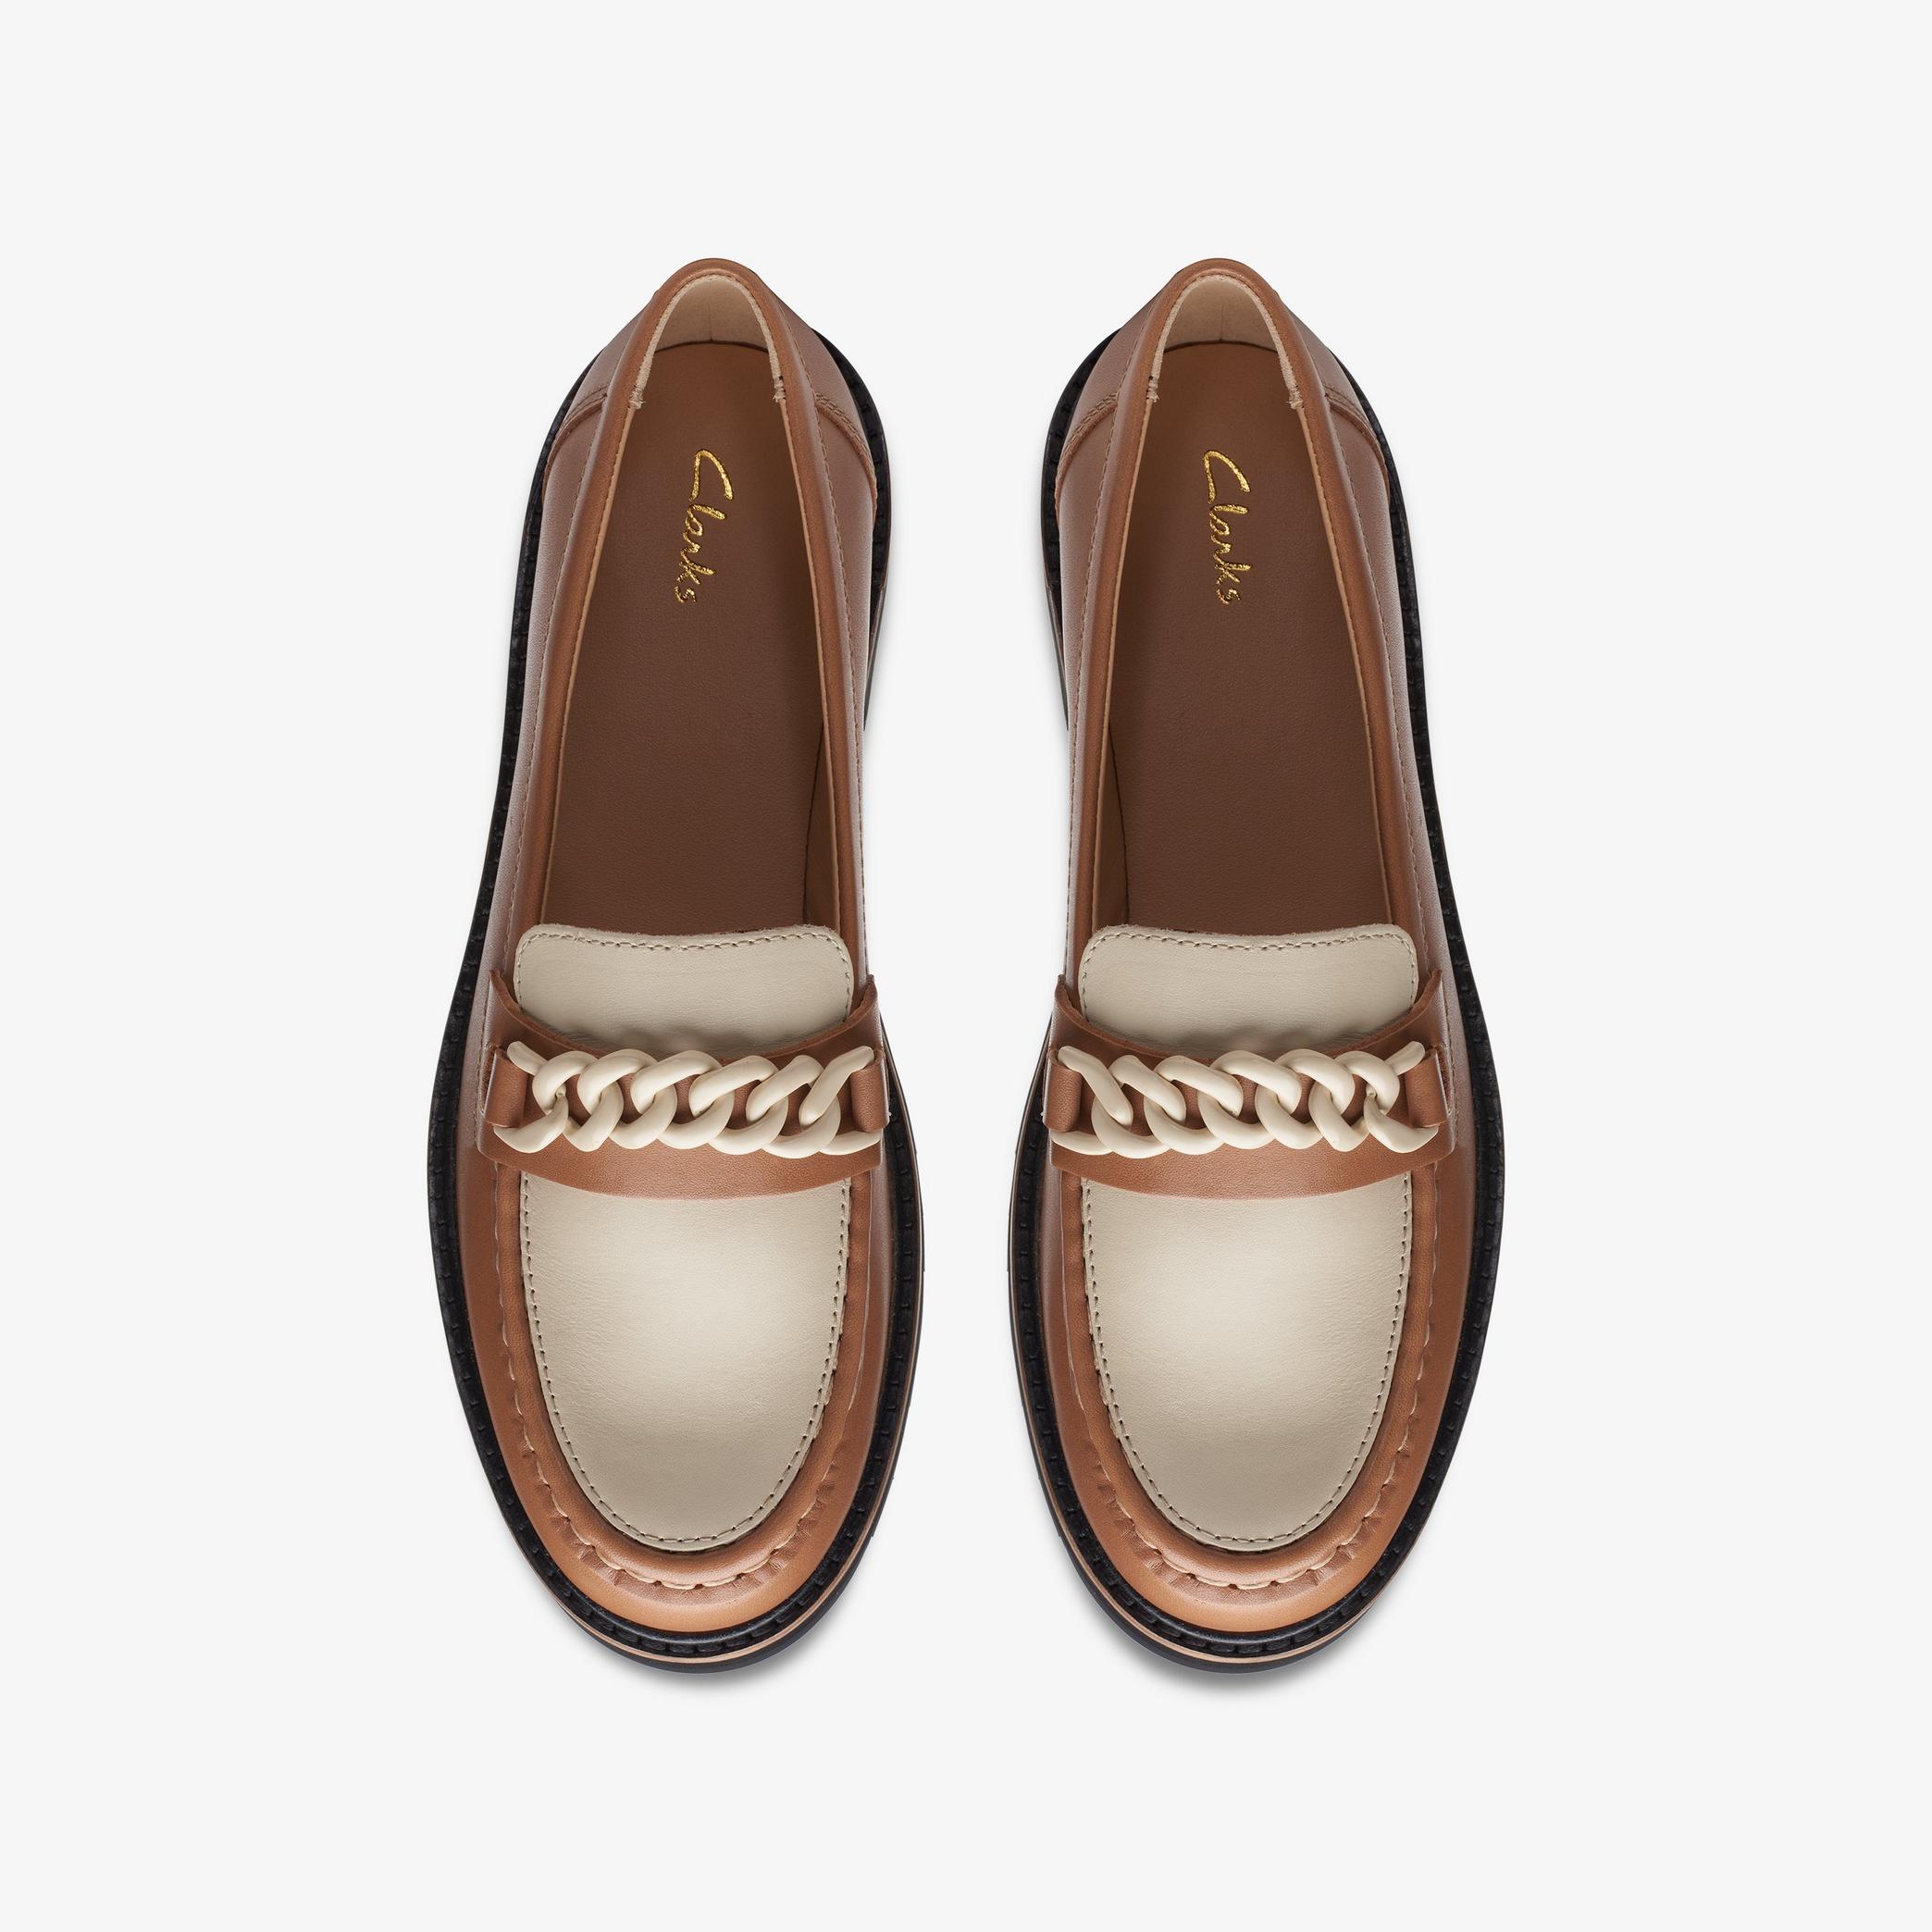 Orianna Edge Praline Combination Loafers, view 6 of 6